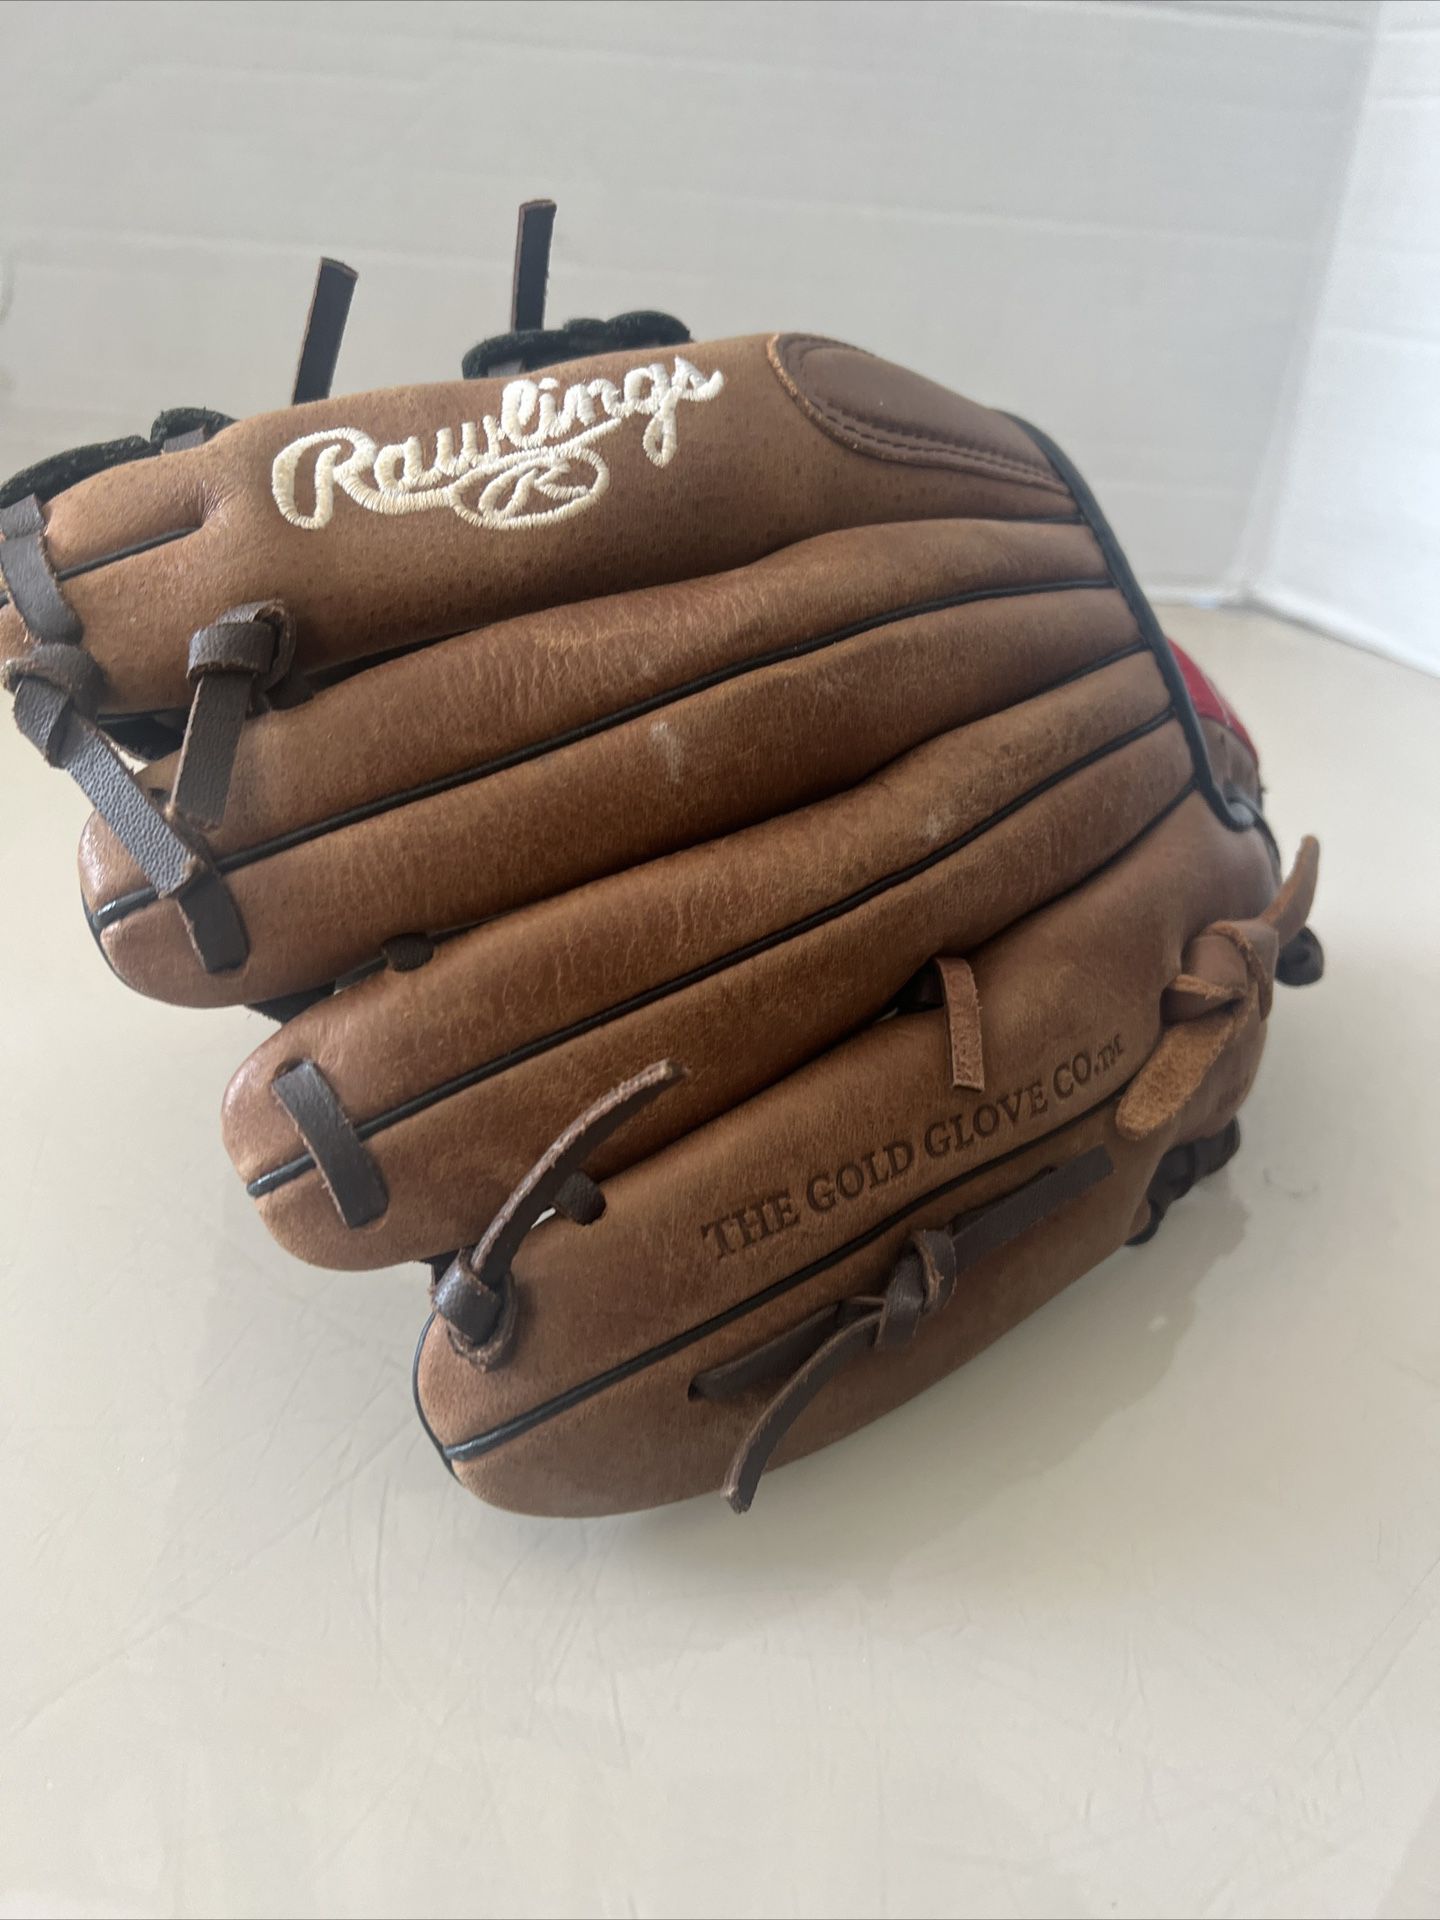 RAWLINGS Youth Baseball Glove D112PT Genuine Leather 11 1/4" Black & Brown RHT. Pre owned in great condition and already broken in and ready to go! 